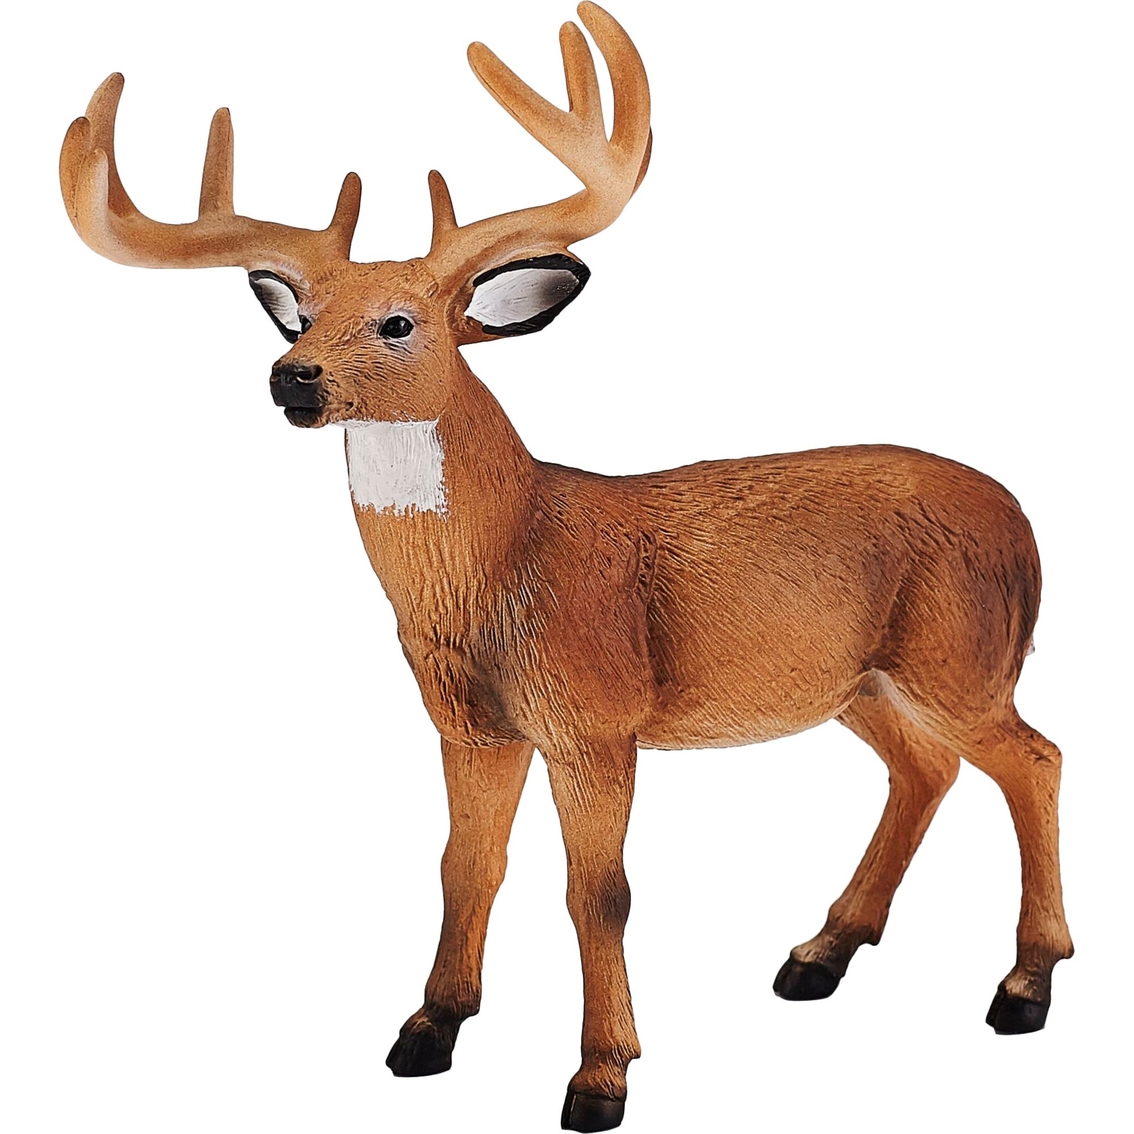 Details about   Safari Ltd White Tail Deer Buck Large Replica Figure Toy 113589 New Free Ship 